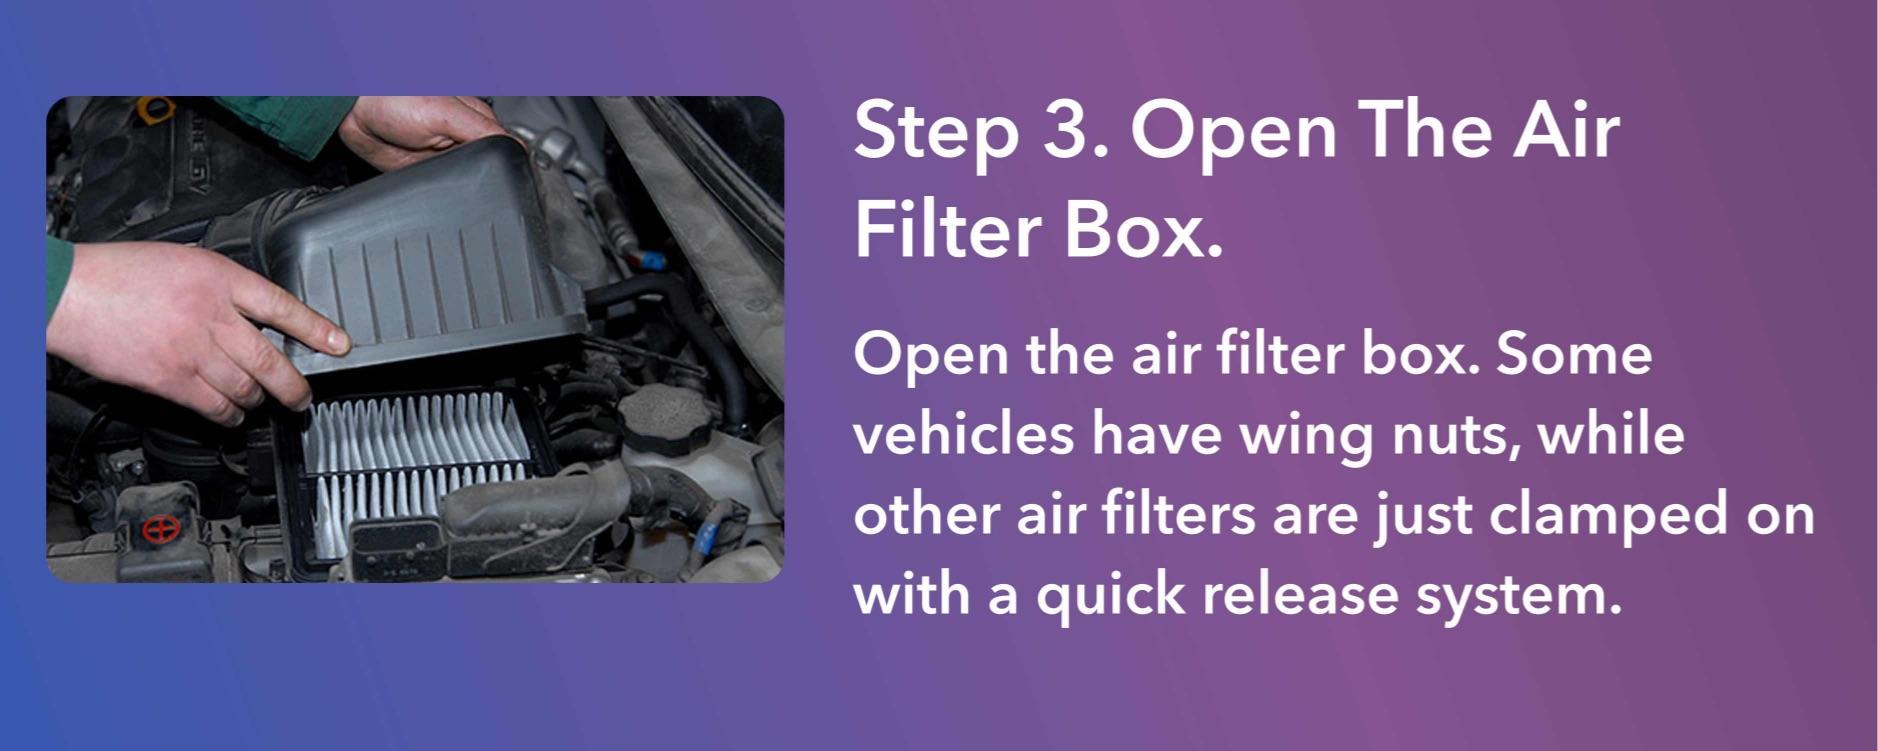 Open the air filter box. Some vehicles have wing nuts, while other air filters are just clamped on with a quick release system.